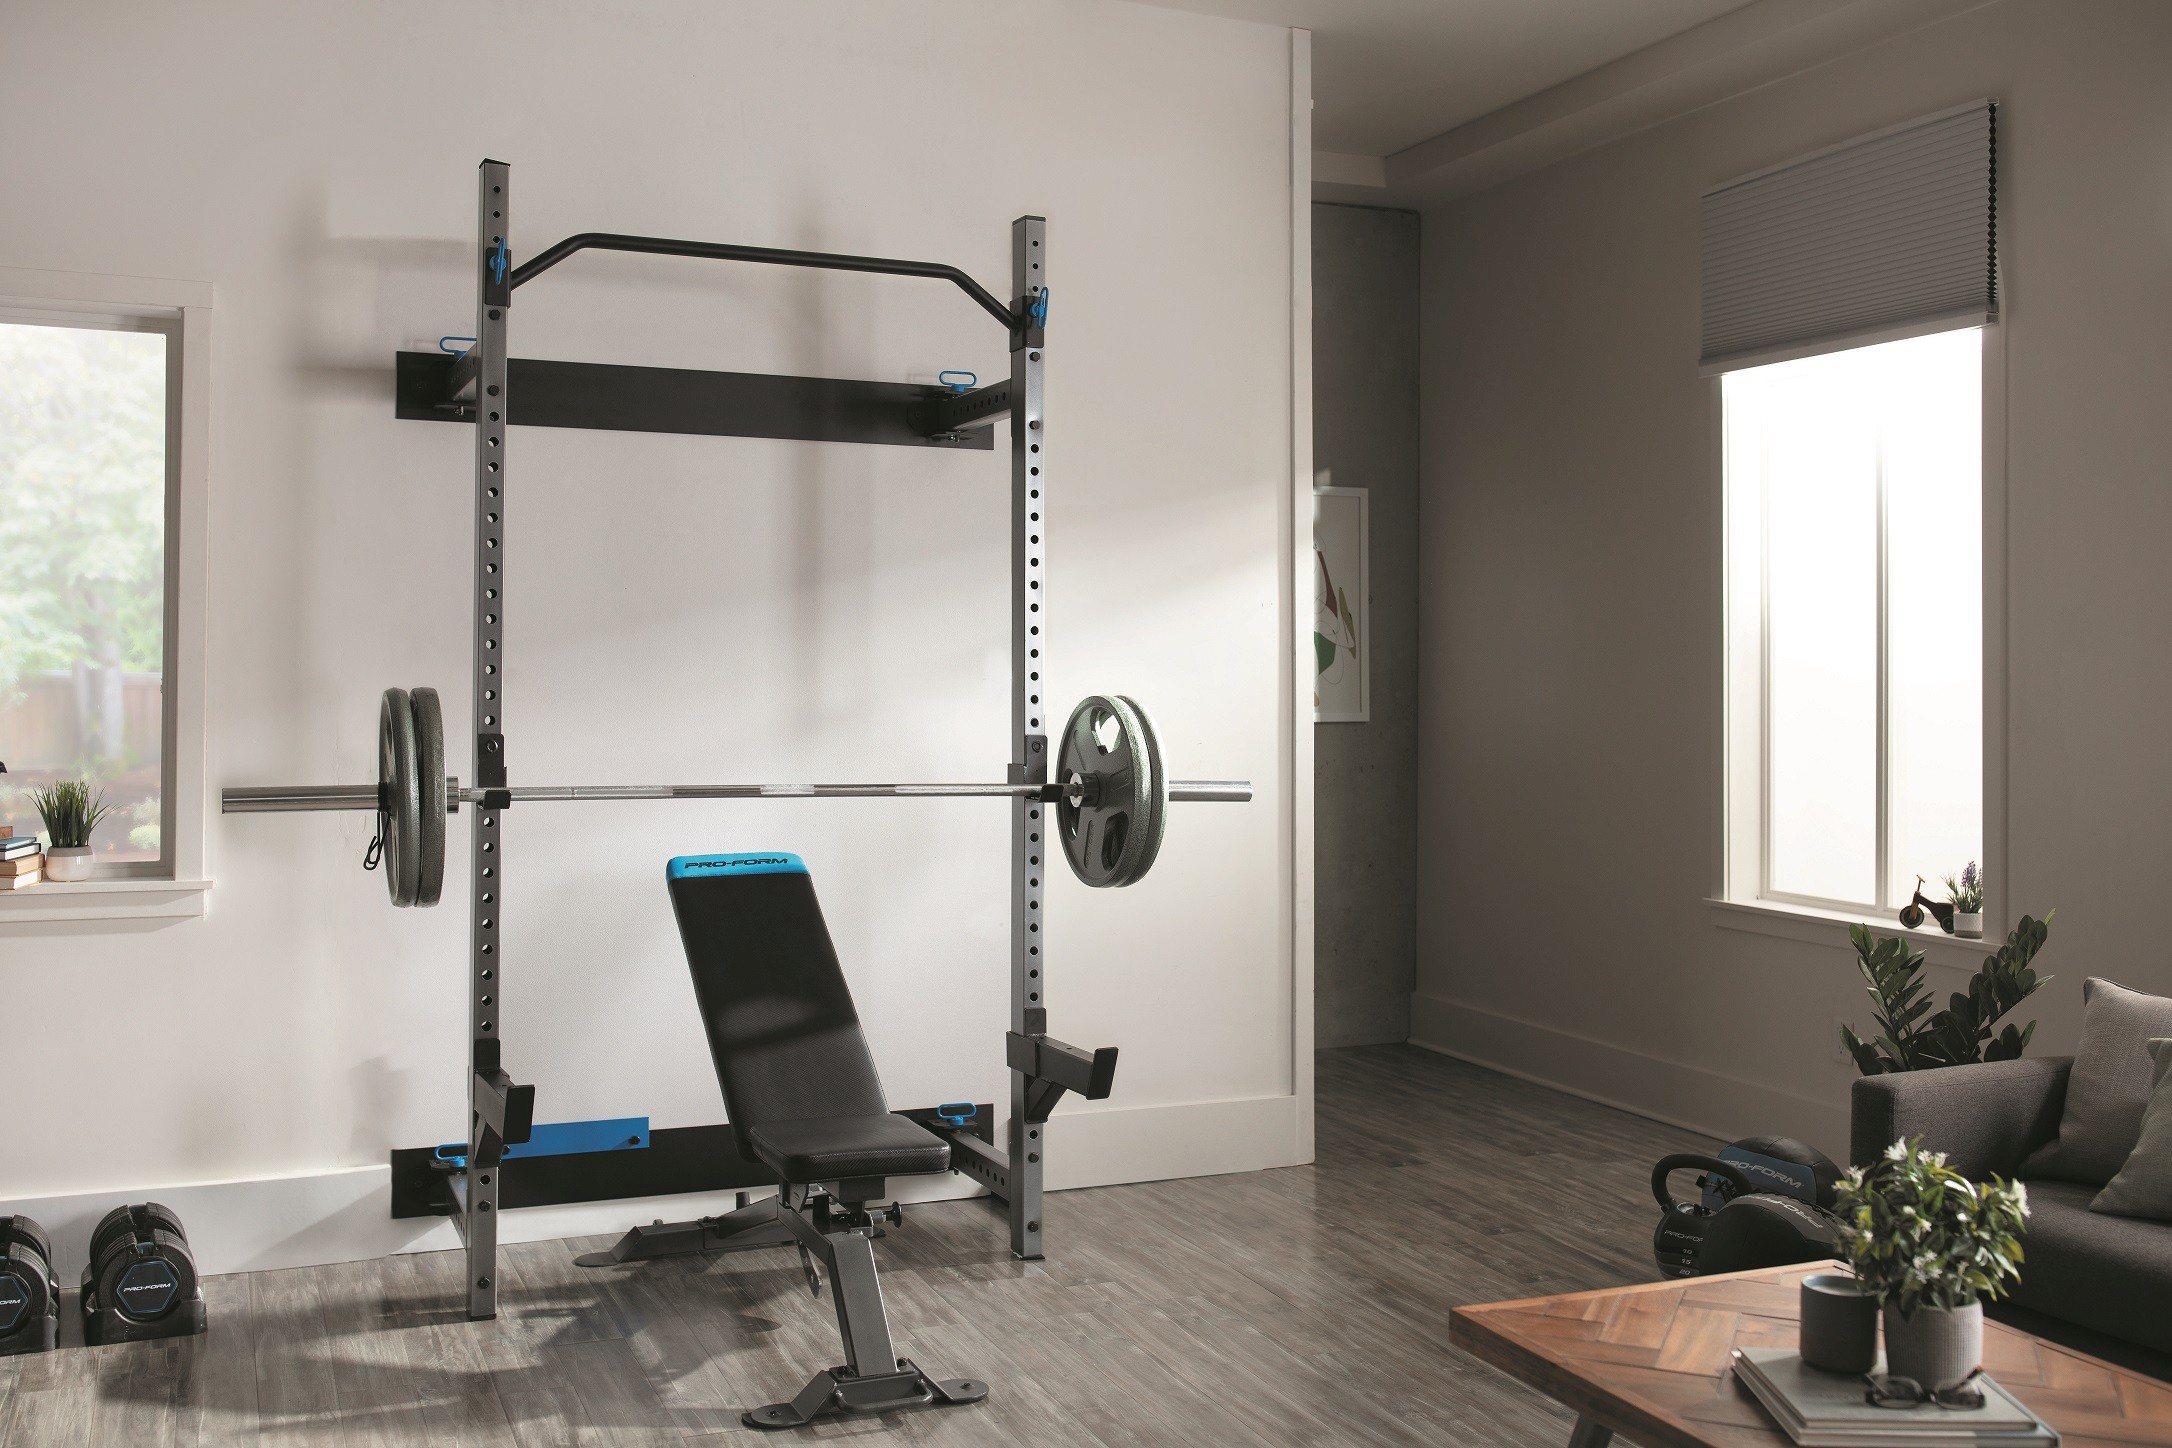 Carbon Strength Foldable Wall Rack 